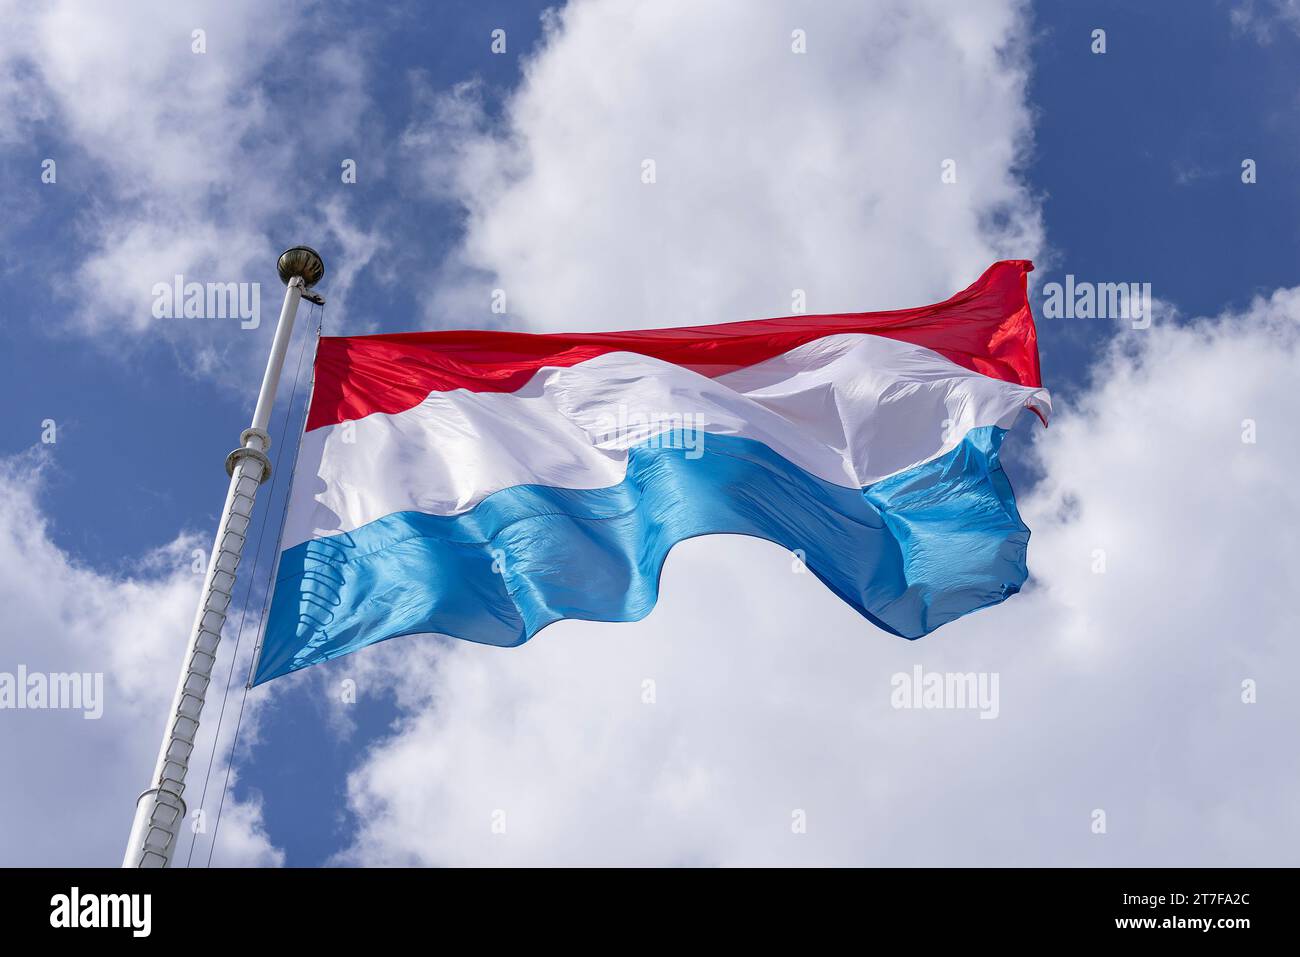 Luxembourg City, Luxembourg - Focus on the national flag of Luxembourg installed on the Aussichtsplattform Platz der Nation in Luxembourg City. Stock Photo